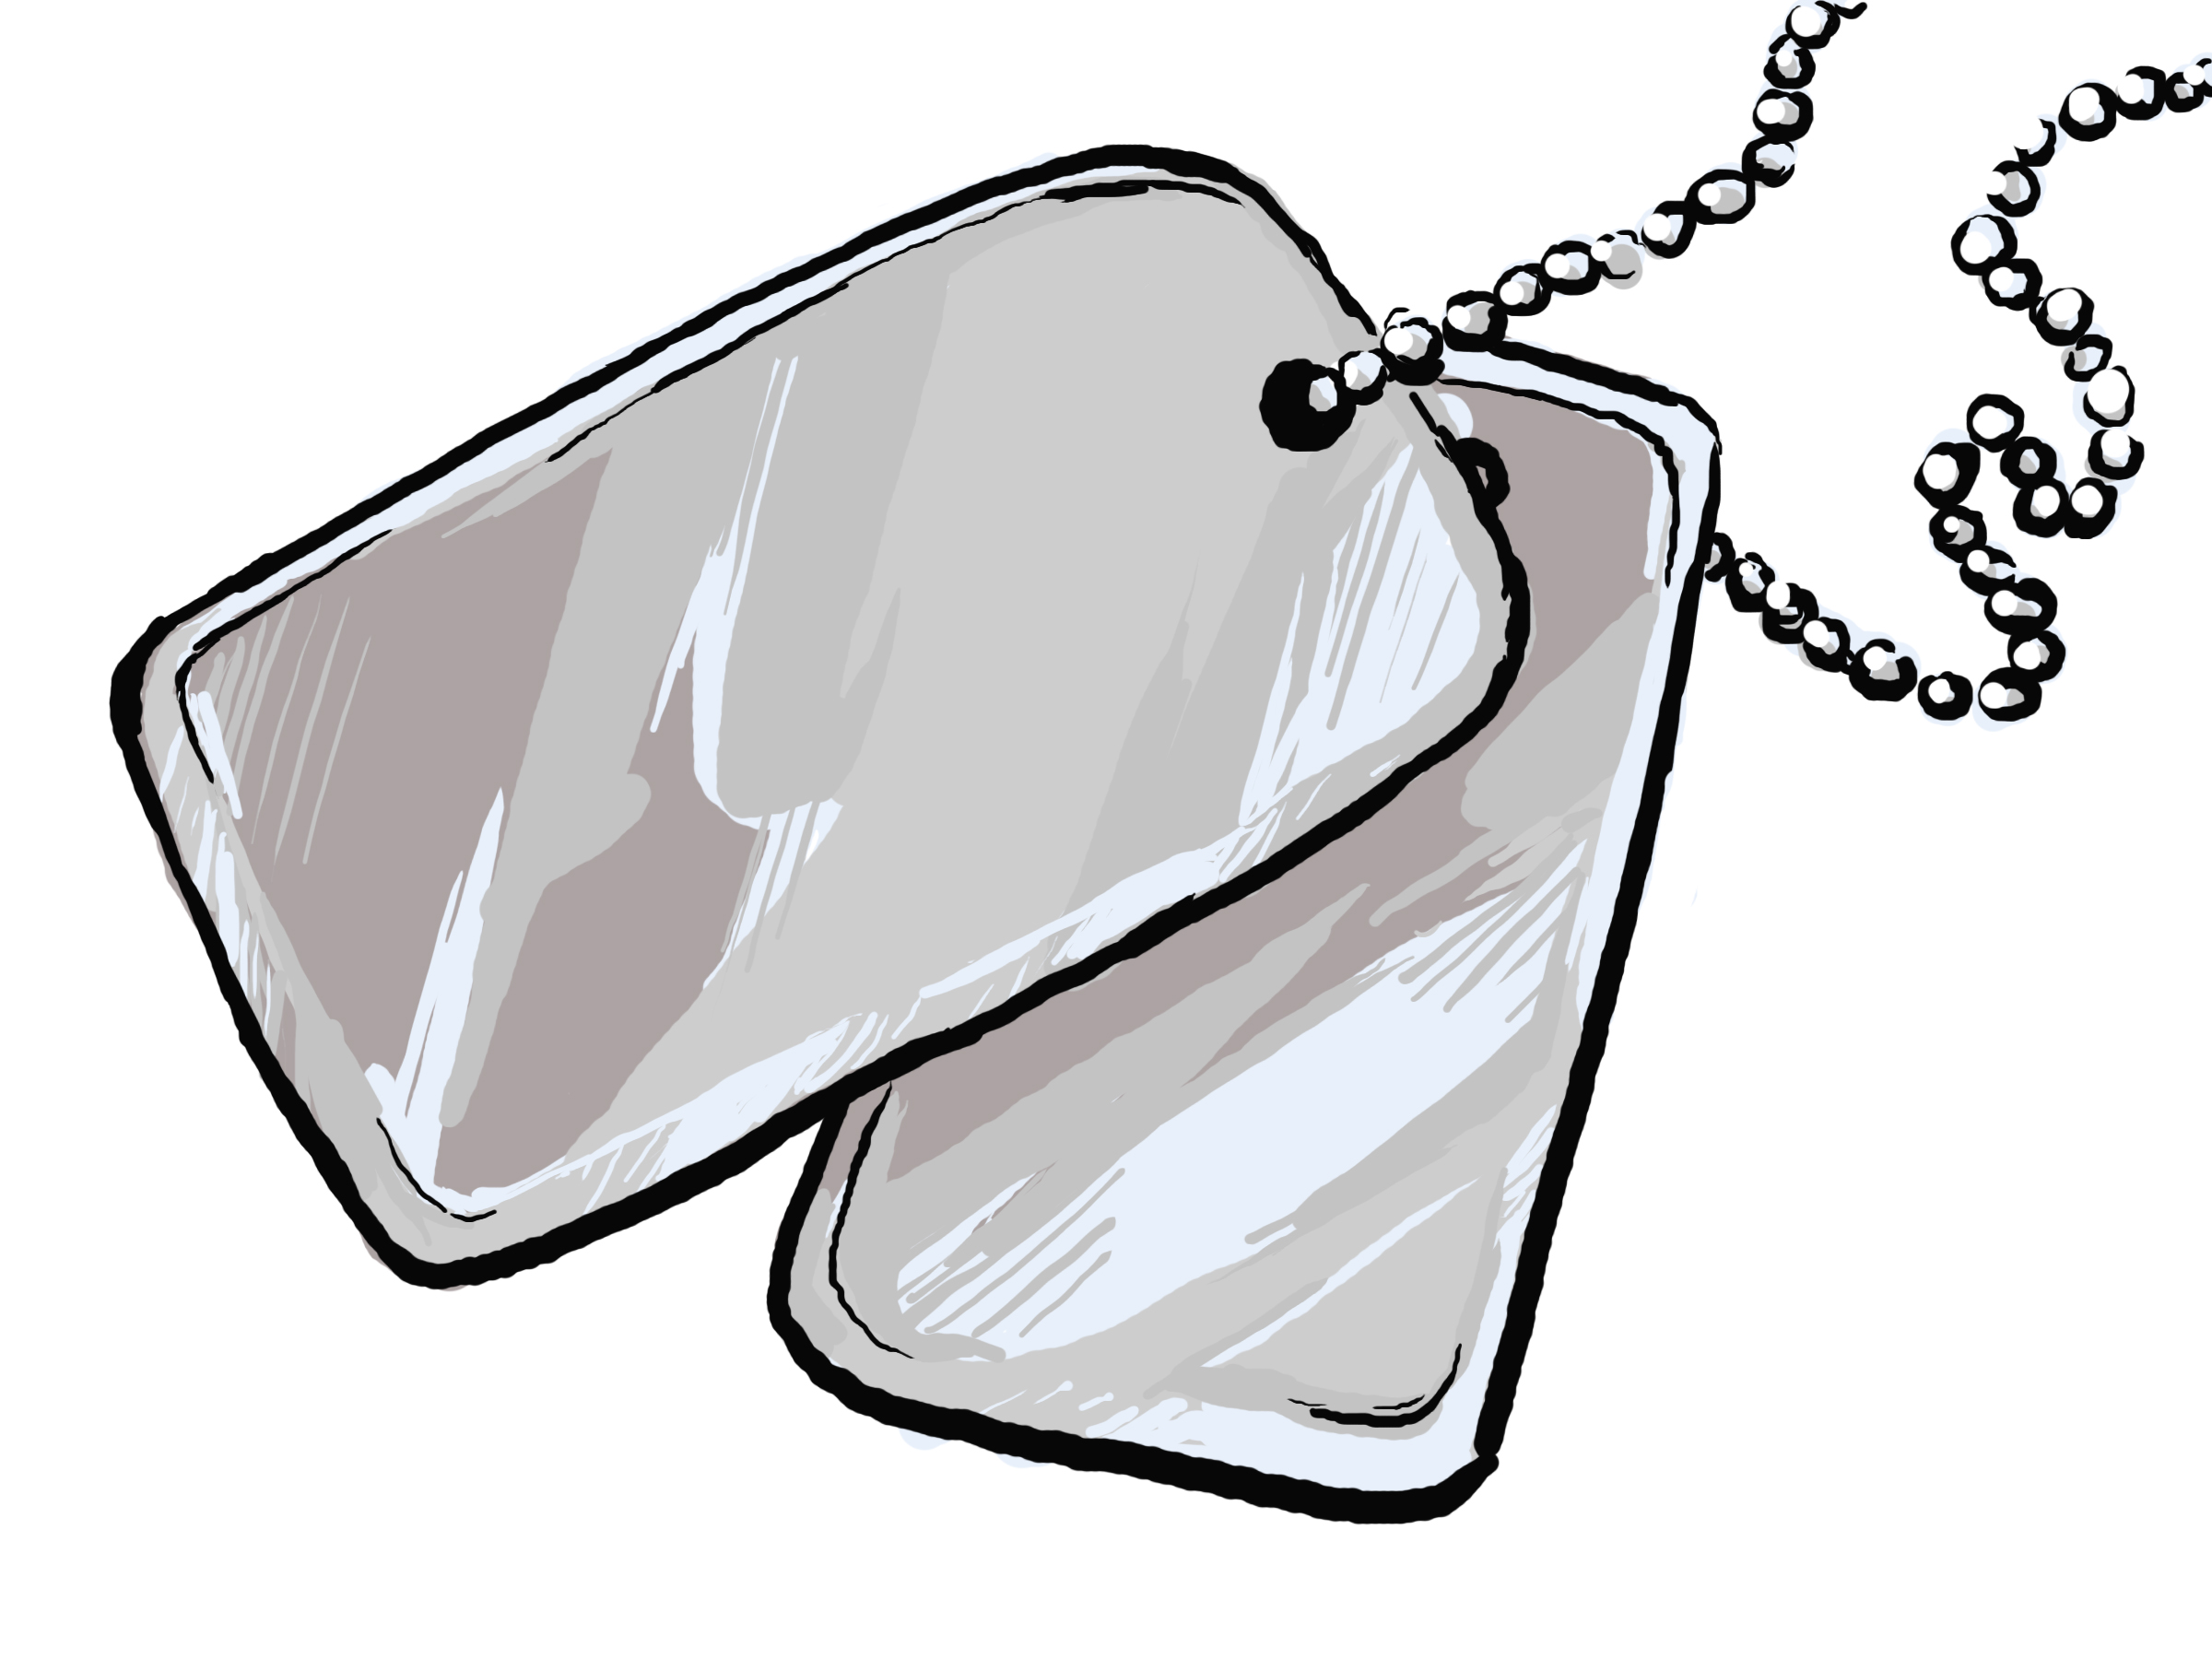 Army Dog Tags Clipart